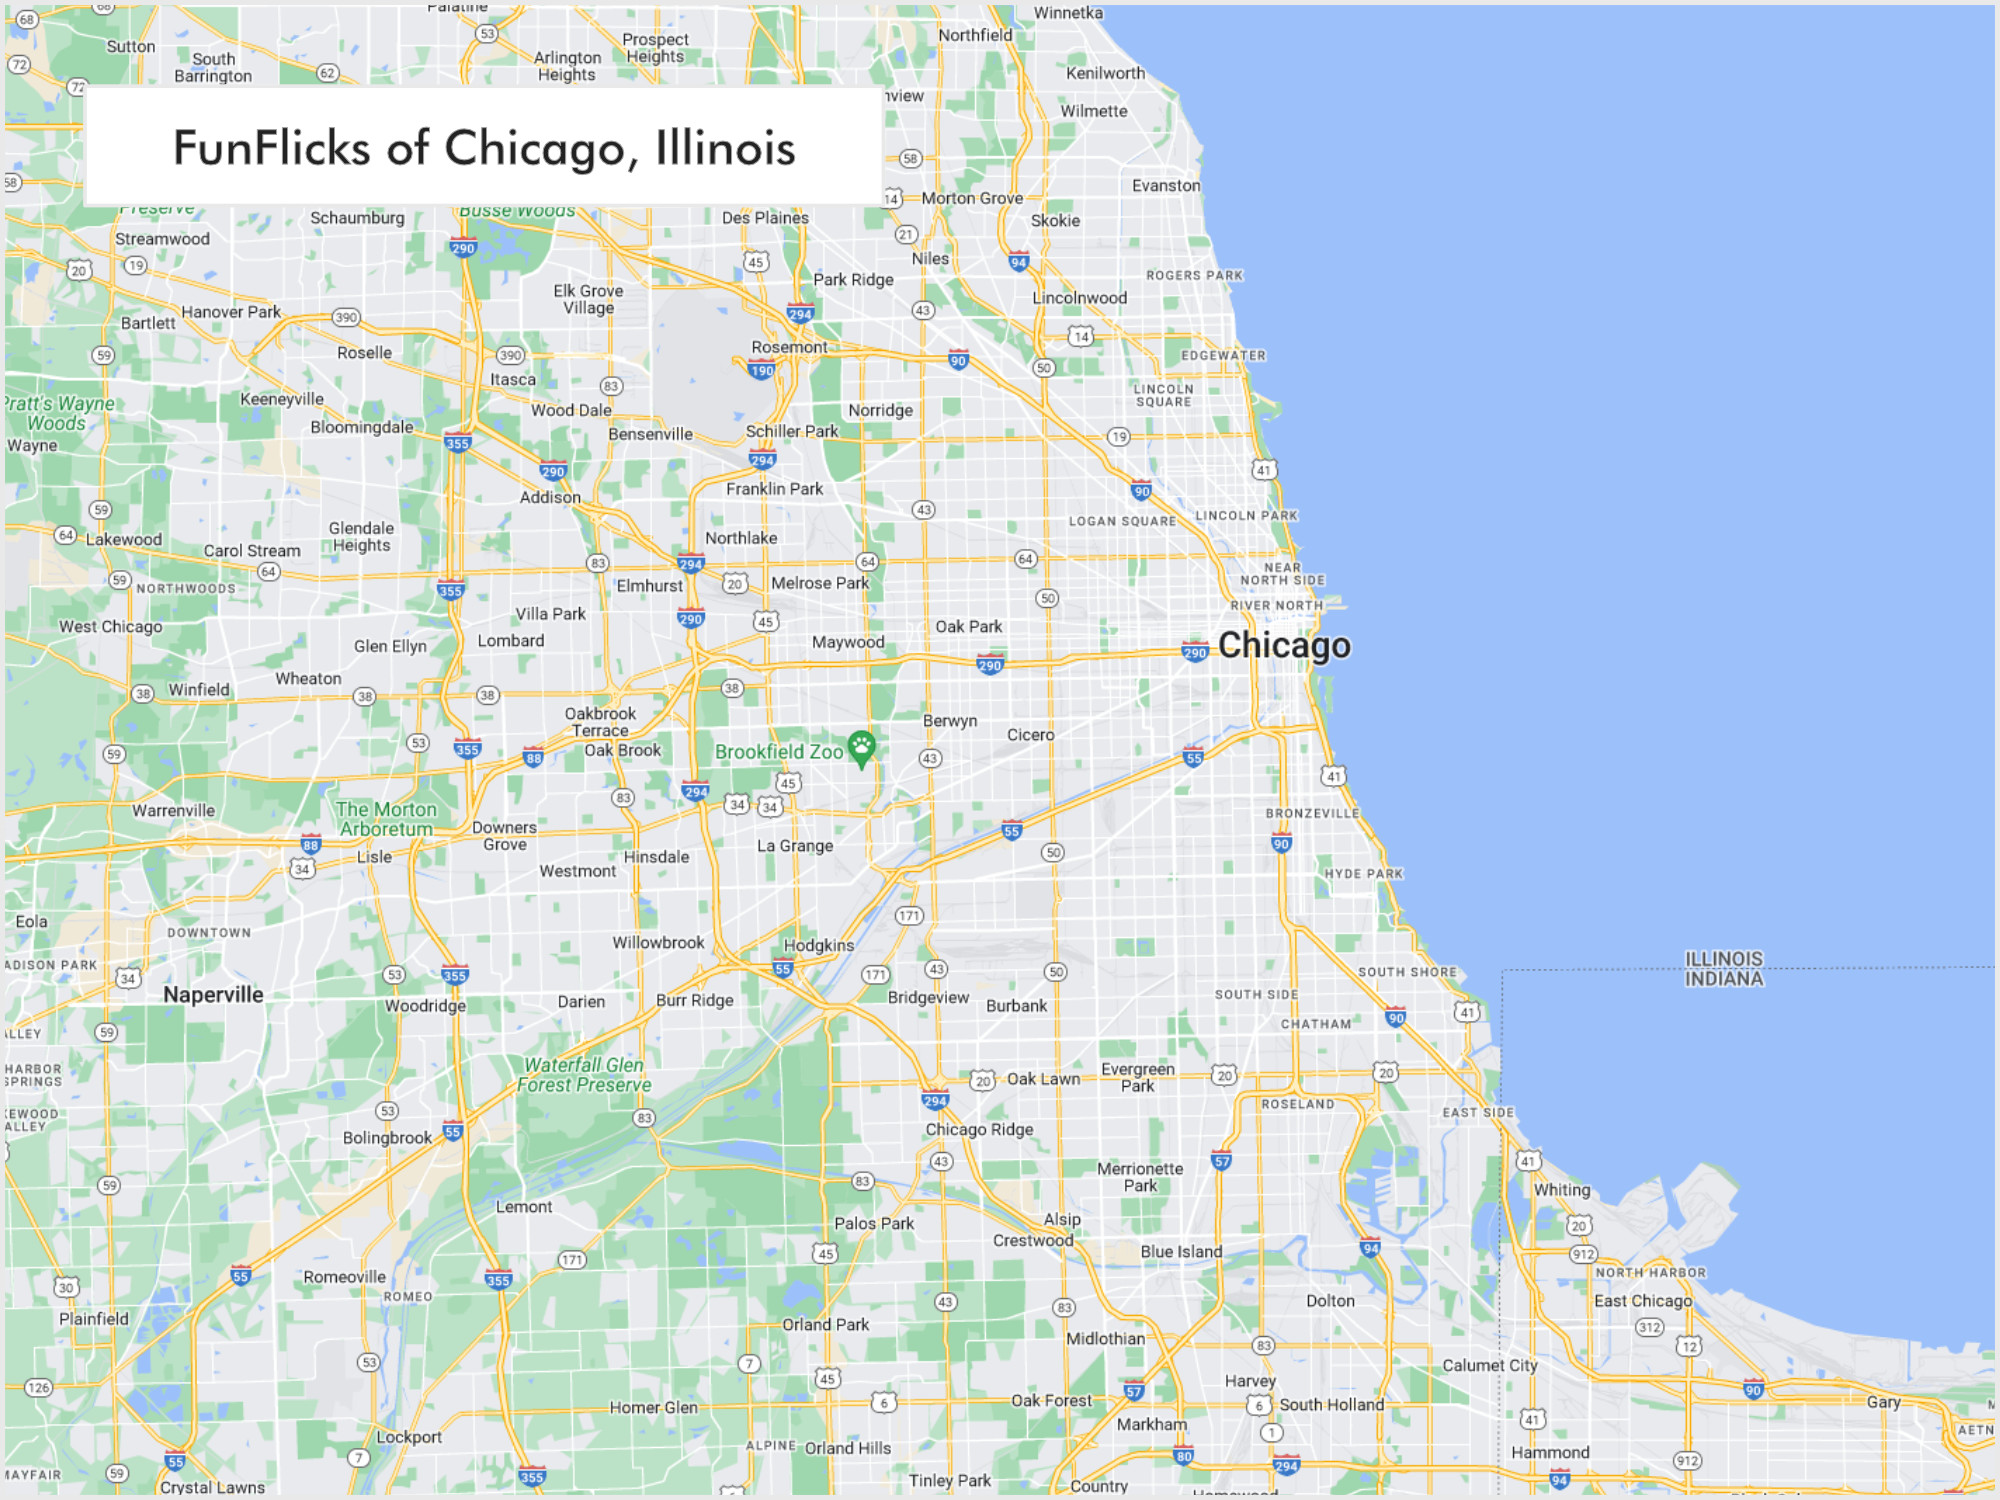 FunFlicks® Chicago territory map